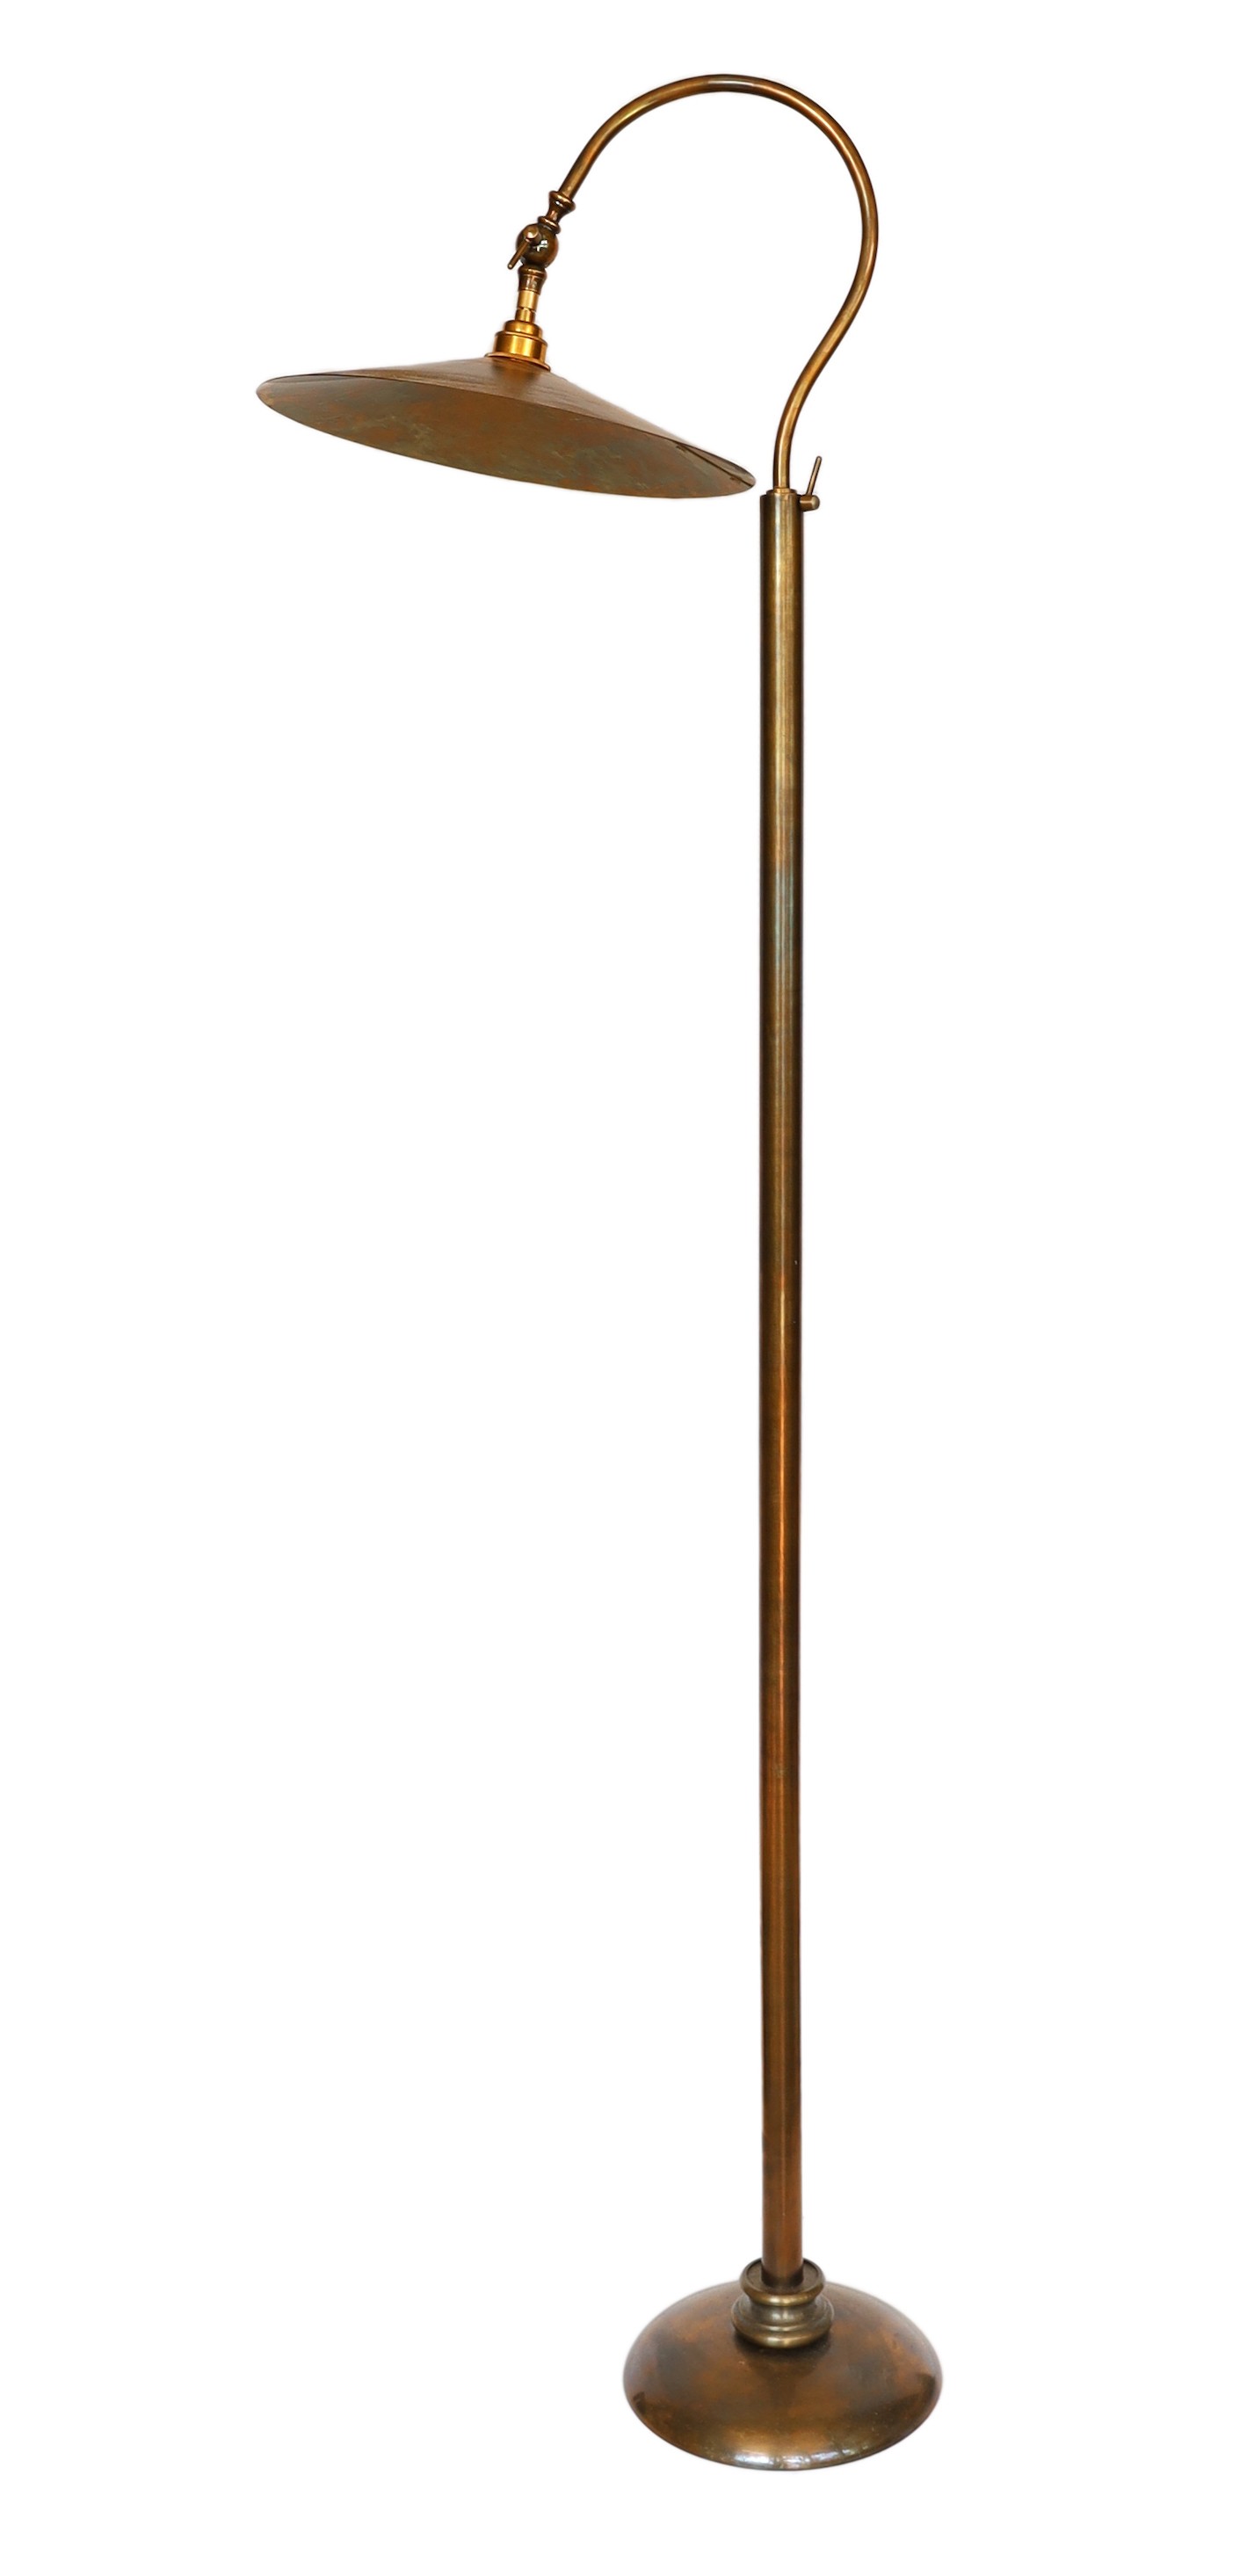 An Edwardian style bronzed metal telescopic lamp standard with adjustable shade, height 169cm